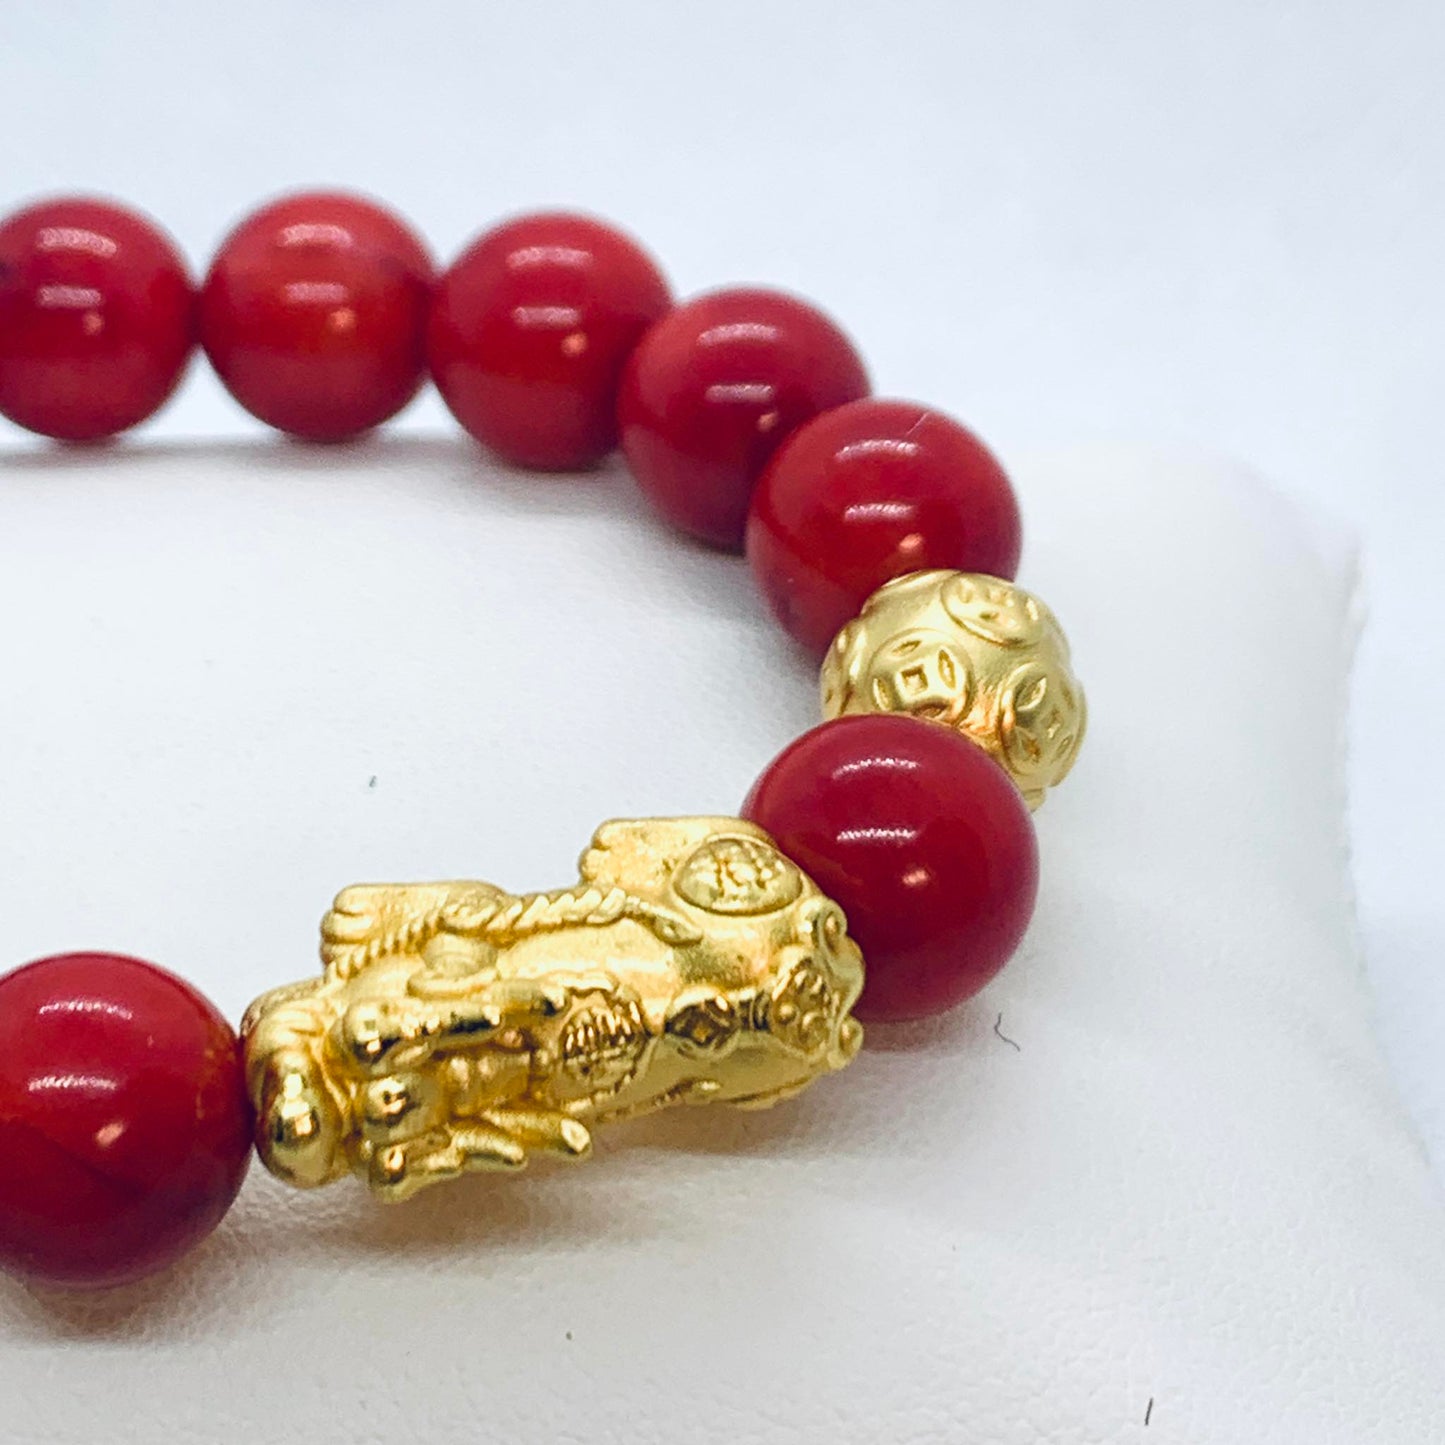 Natural White Coral Dyed Red Bracelet 10 or 12mm with Pixiu